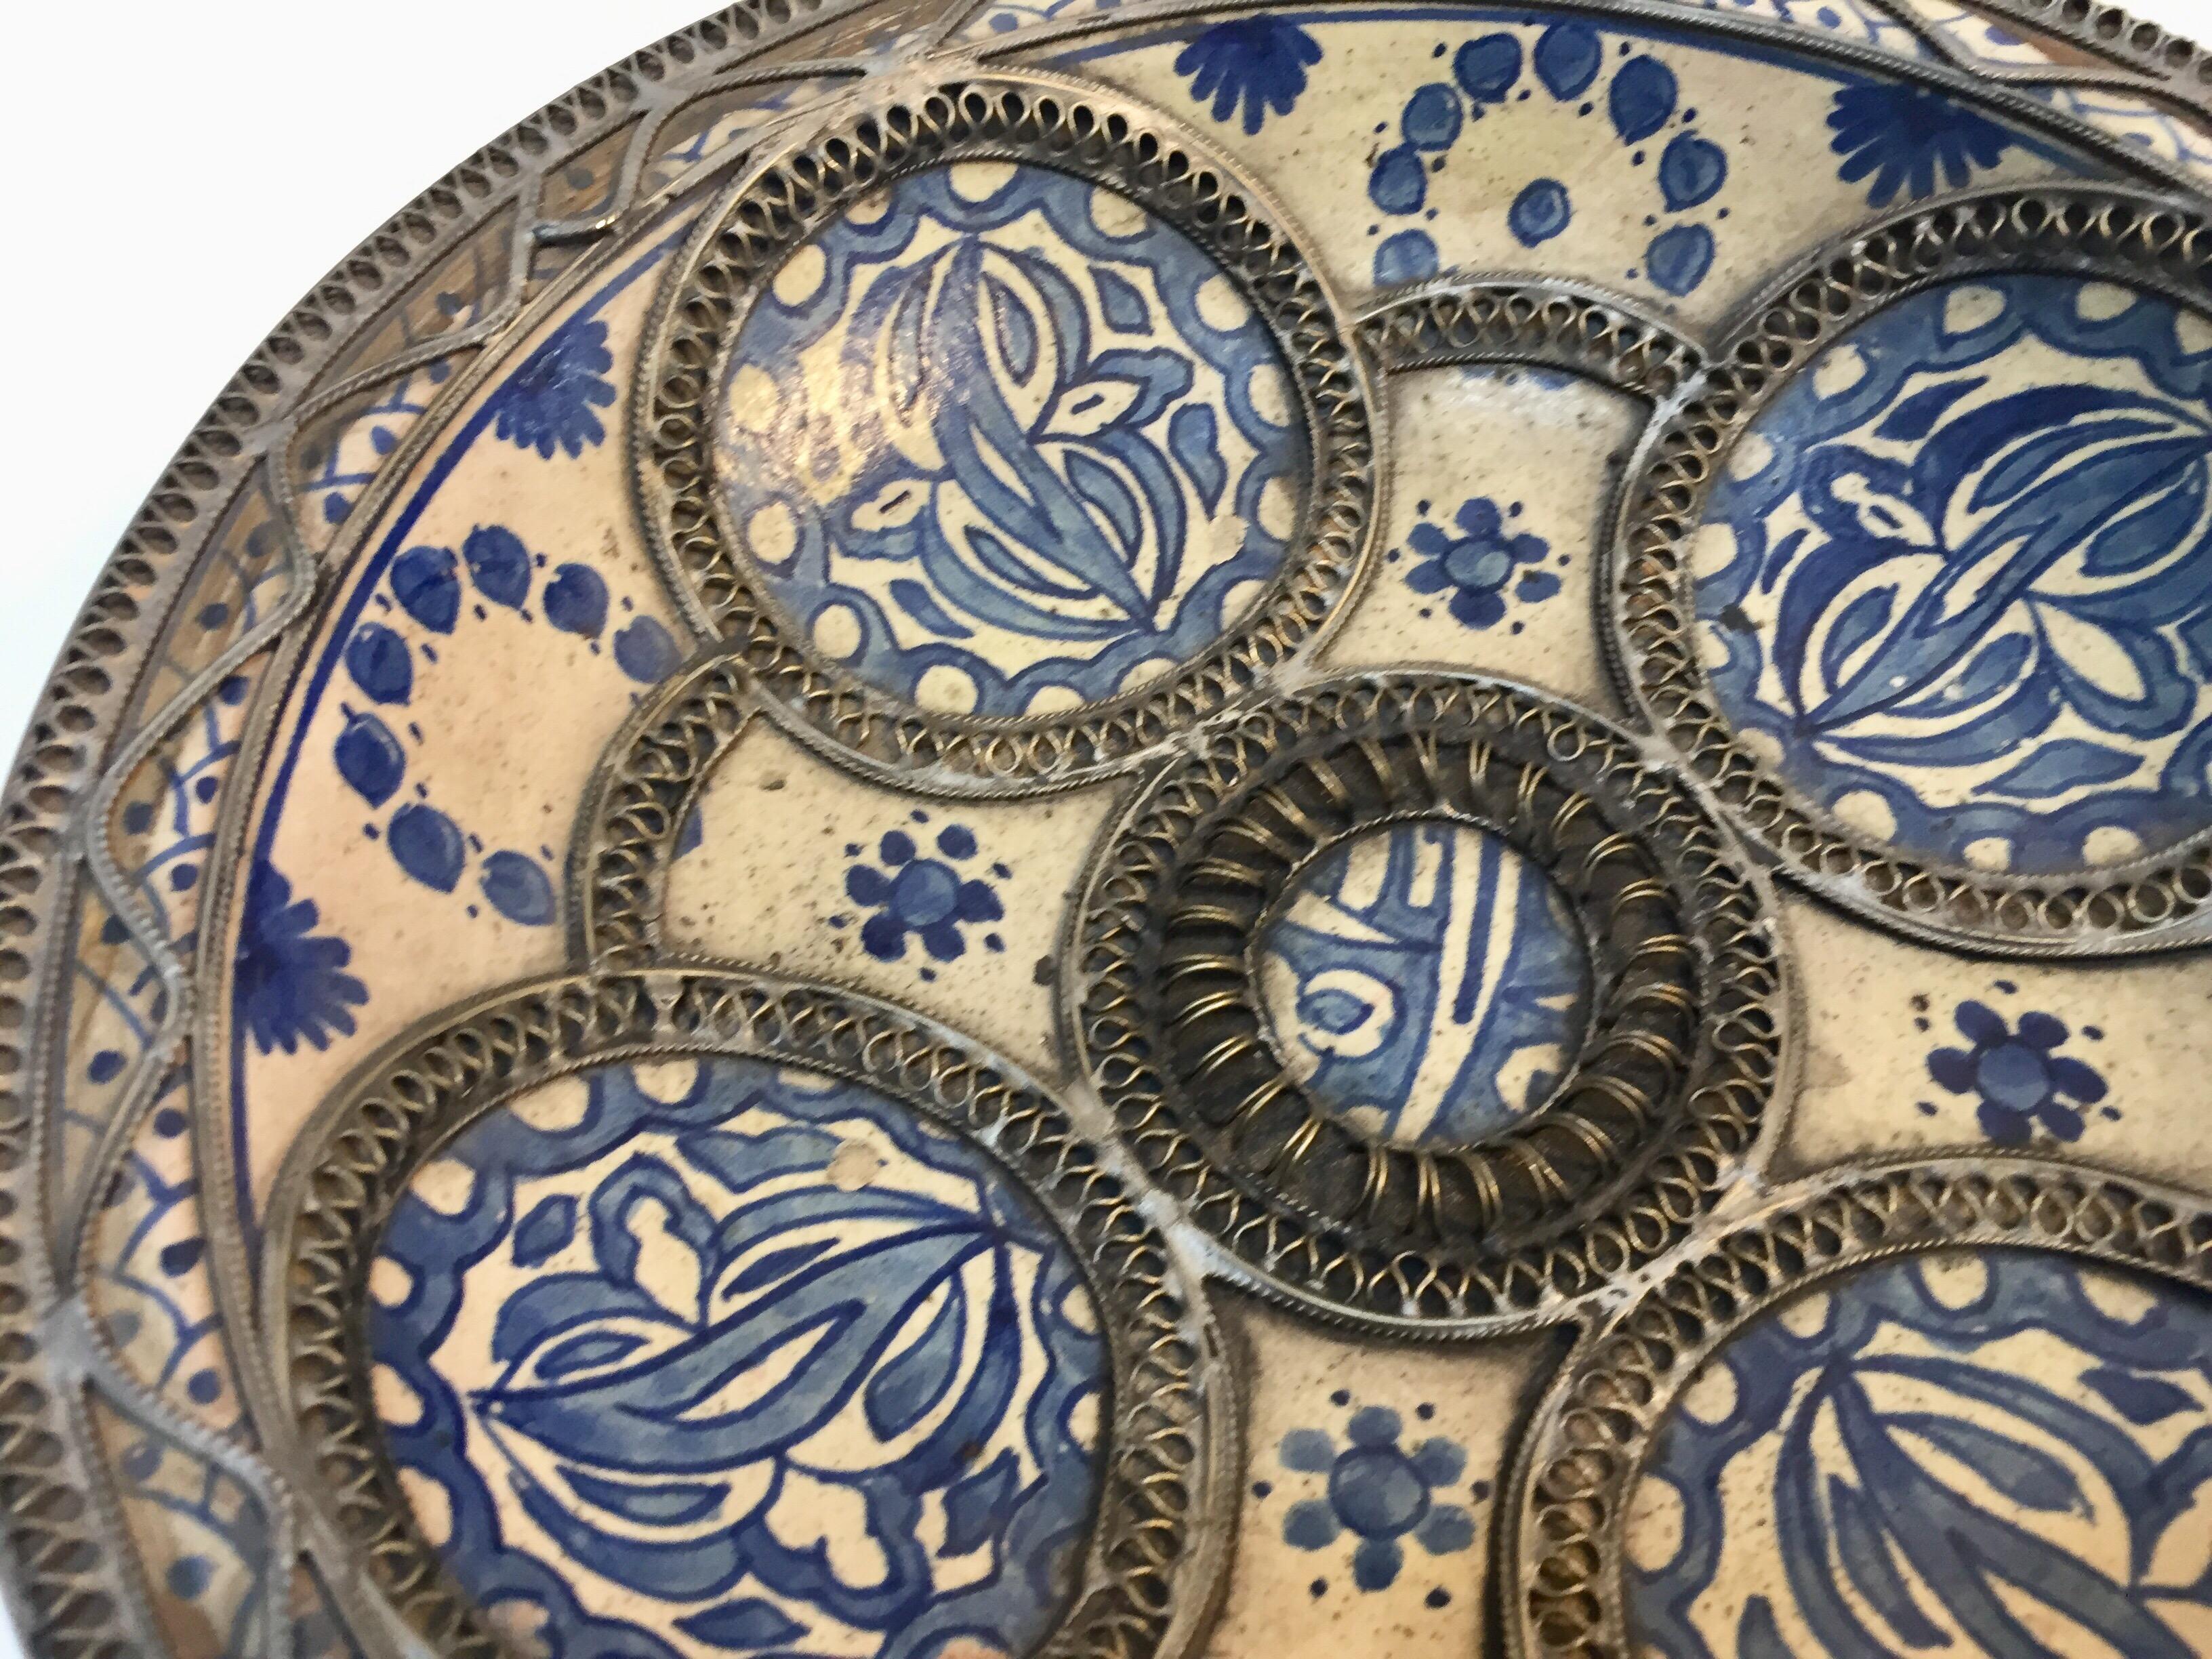 Decorative Moroccan Blue and White Handcrafted Ceramic Bowl from Fez 2